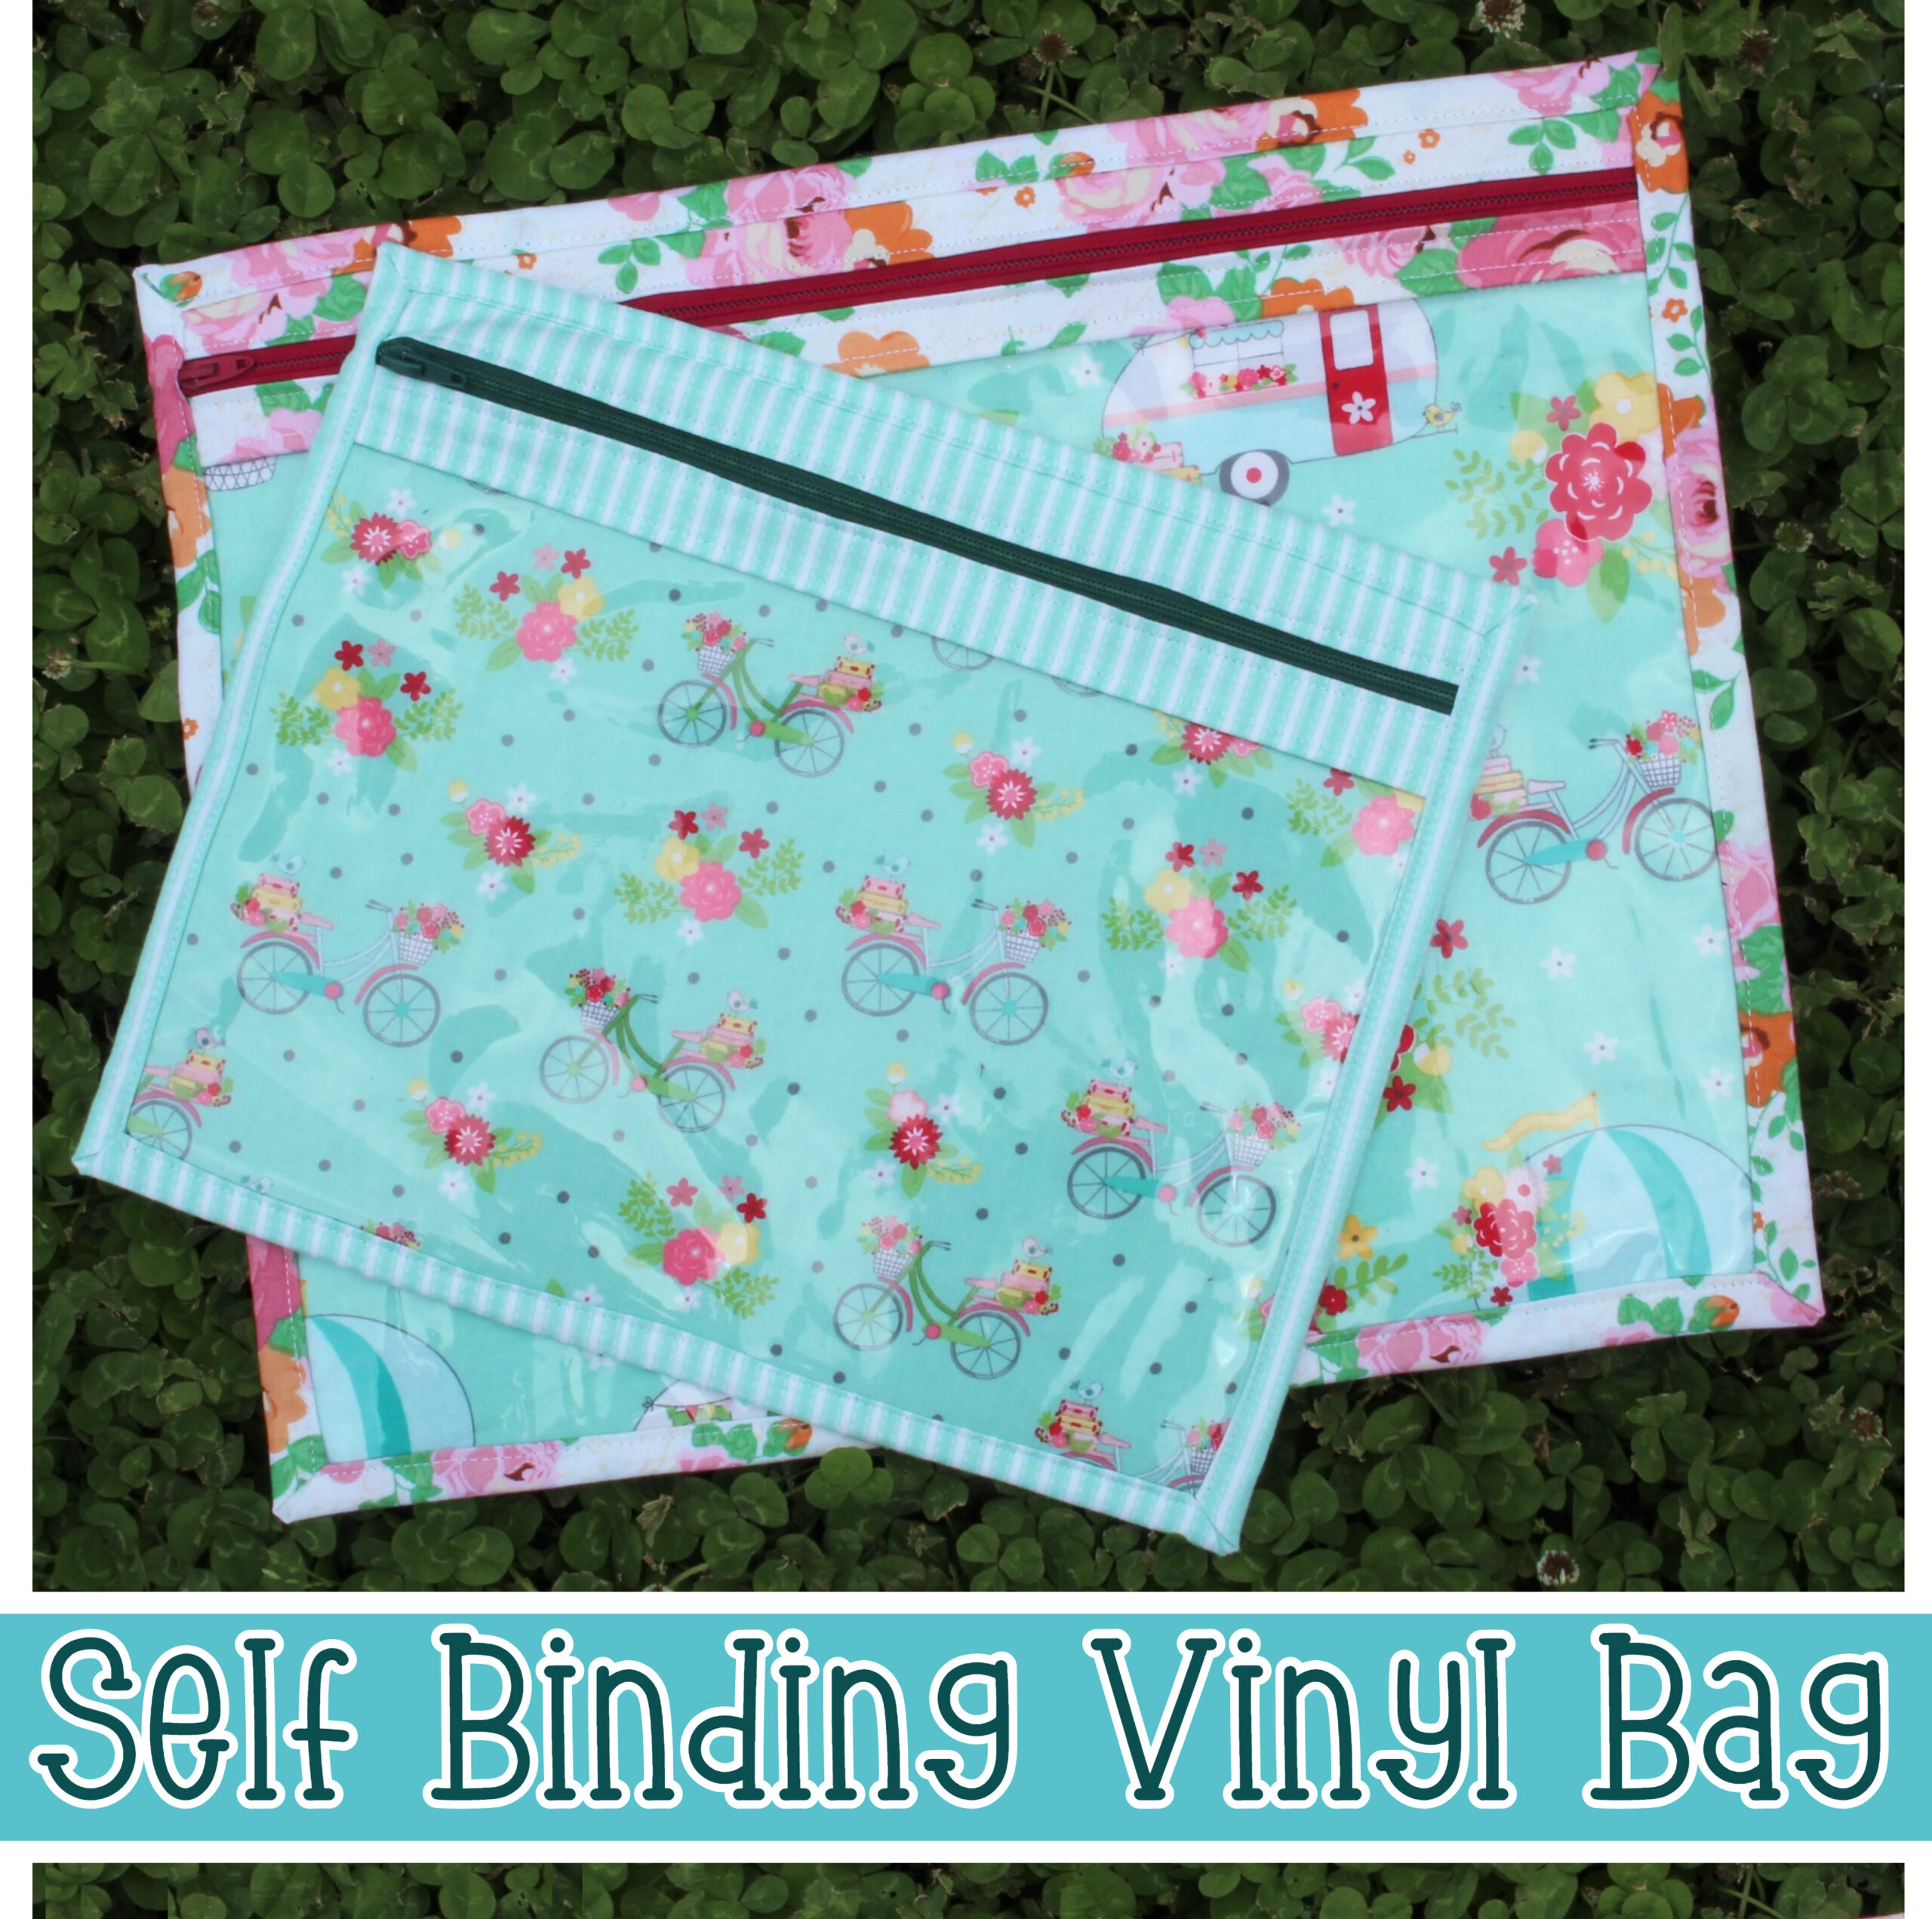 How to Sew A Vinyl Project Pouch: Free Step-By-Step Pattern